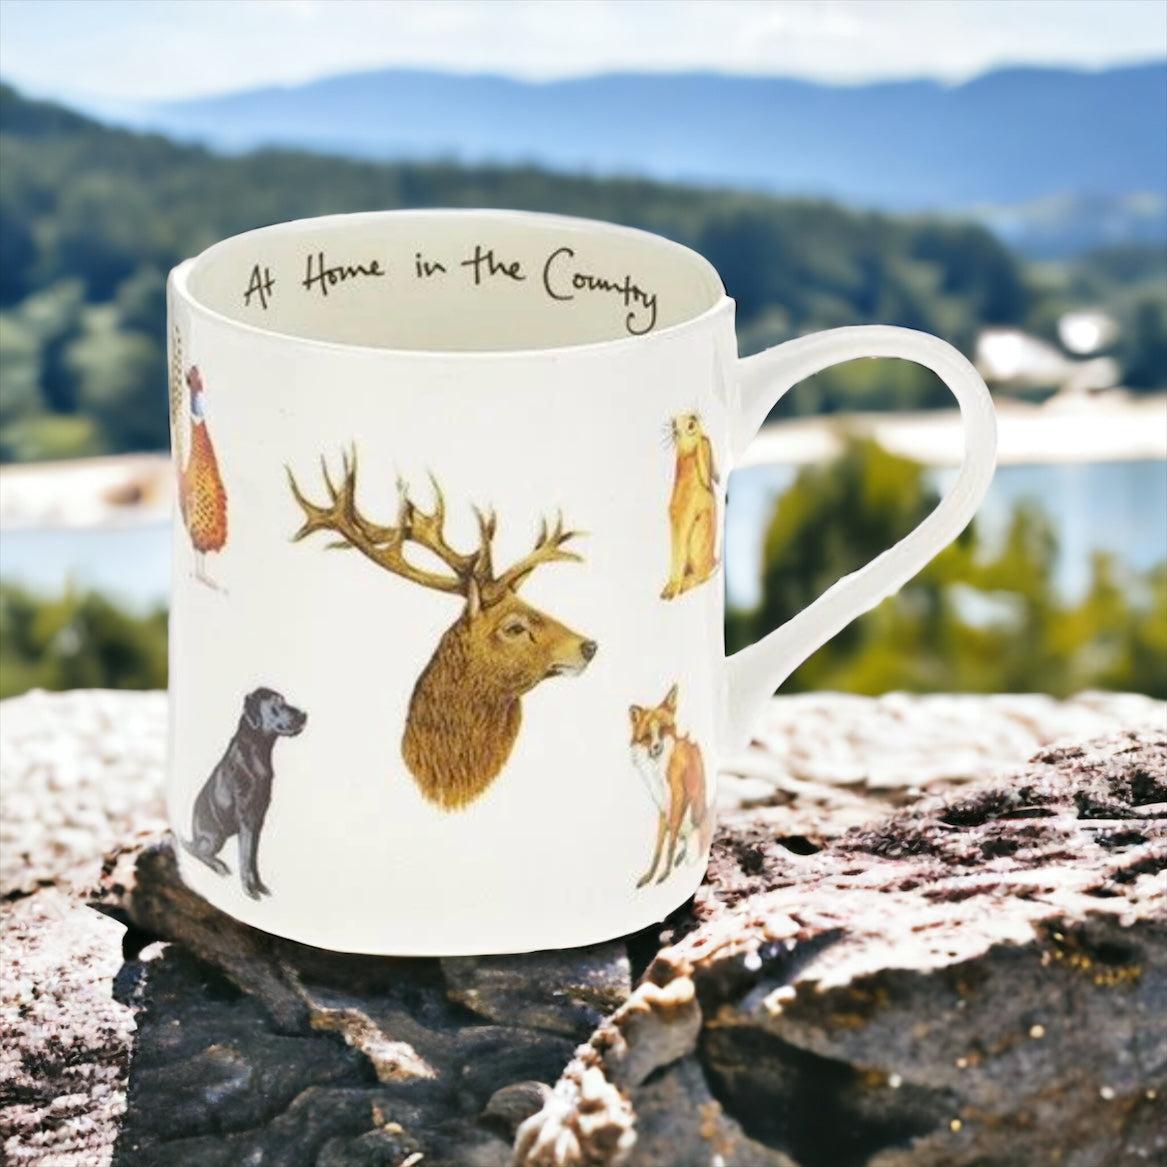 At Home in the Country Mug